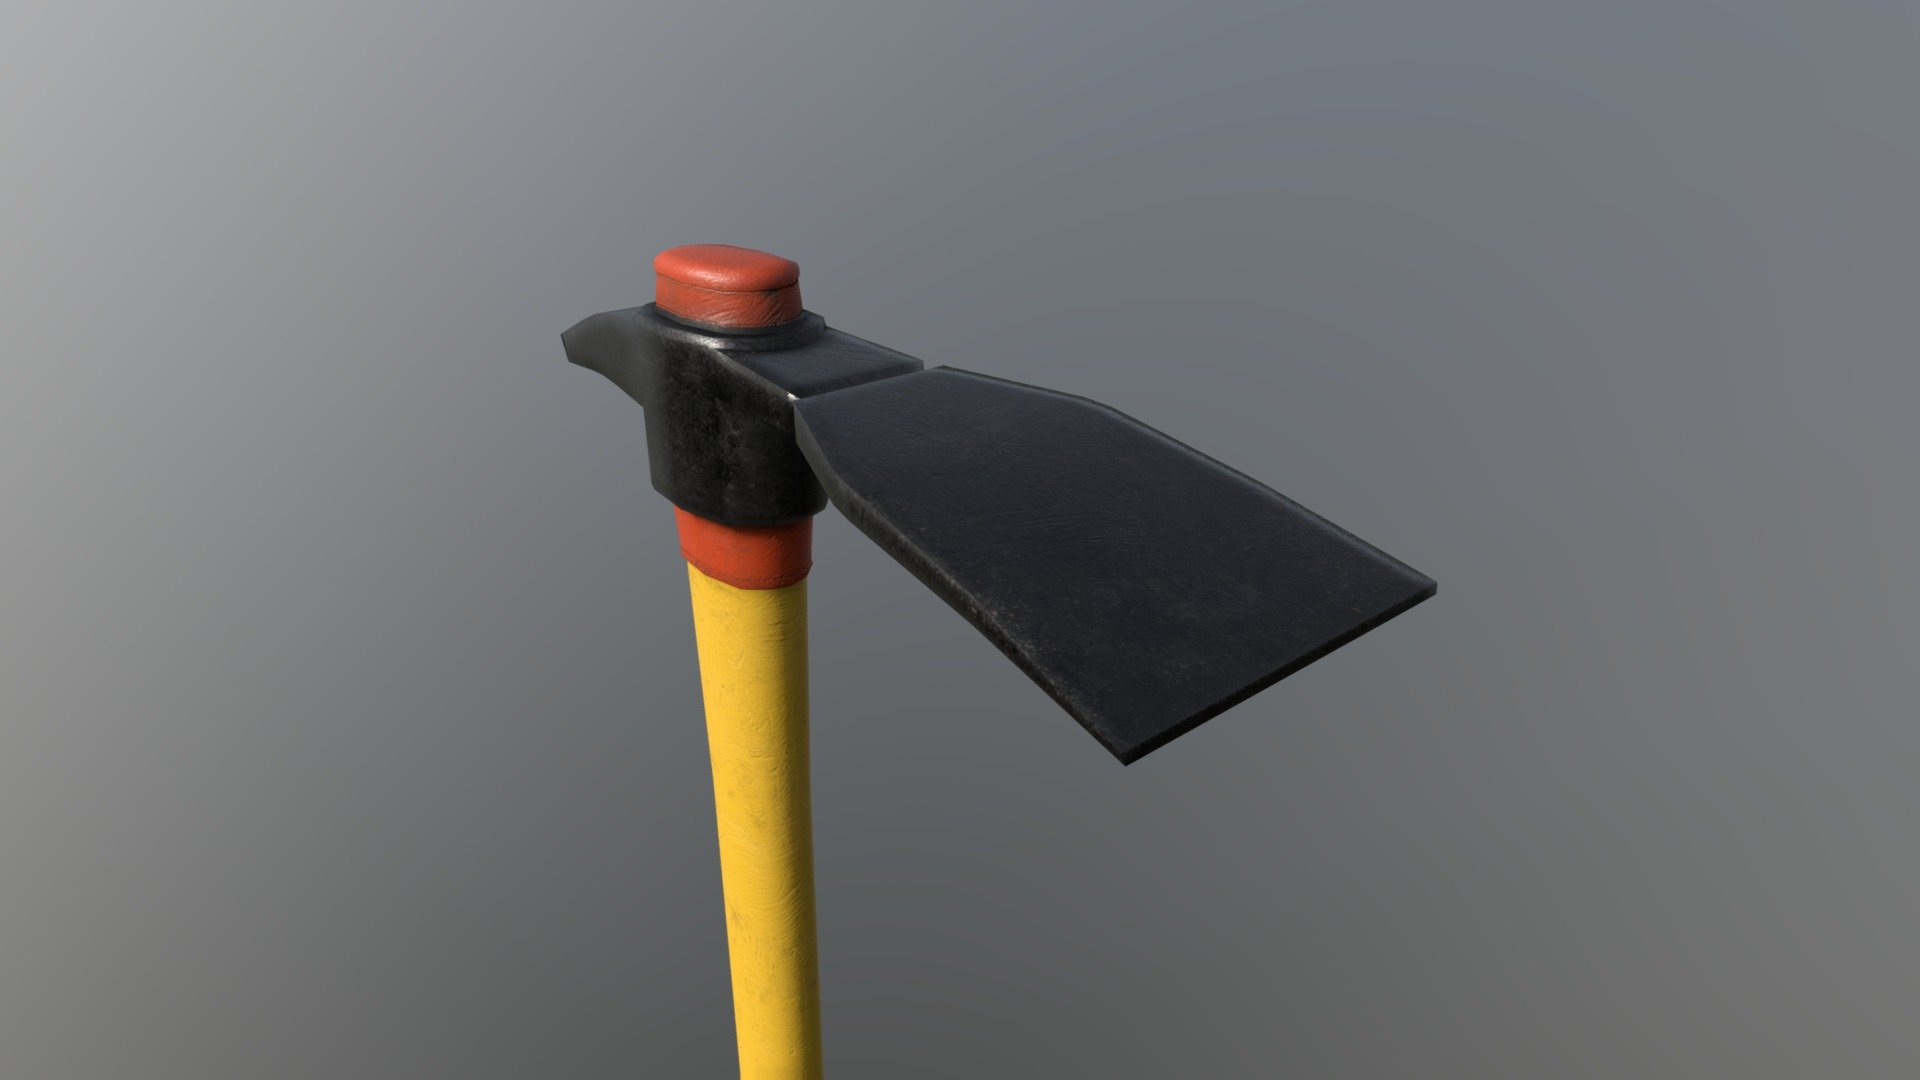 Enhance your best survival/crafting projects (game, render, advertising, design visualization, VR/AR&hellip;) with this awesome Modern Hoe !

Game-ready !

Low-poly but very high quality material for the best visual and performance. Ideal for VR/AR games !

PBR material ready-to-go optimized for multiple engines and rendering software (Unity, Unreal Engine, Crysoftware, Blender&hellip;)

Technical Details

-&gt; 1 High-detail mesh but very optimized in poly-count :




550 Vertices | 536 Faces | 1.022 Tris

Clean mesh, only planar quads and tris

Smoothing group, pivot point and Position/Rotation/Scale already set

Real-size object

-&gt; 1 PBR Material

-&gt; 4 Textures in 2k resolution :




Albedo/Diffuse/Color map

Metalic/Roughness map

Normal map

Ambient Occlusion map

-&gt; UV Map clean and no-overlapping.

-&gt; Modelized in Blender and textured in Substance Painter.

-&gt; Multiple file available : .blend, .fbx, .obj, .unitypackage.

For any more informations, don't hesitate to contact me ! - Hoe Modern - Buy Royalty Free 3D model by Arigasoft 3d model